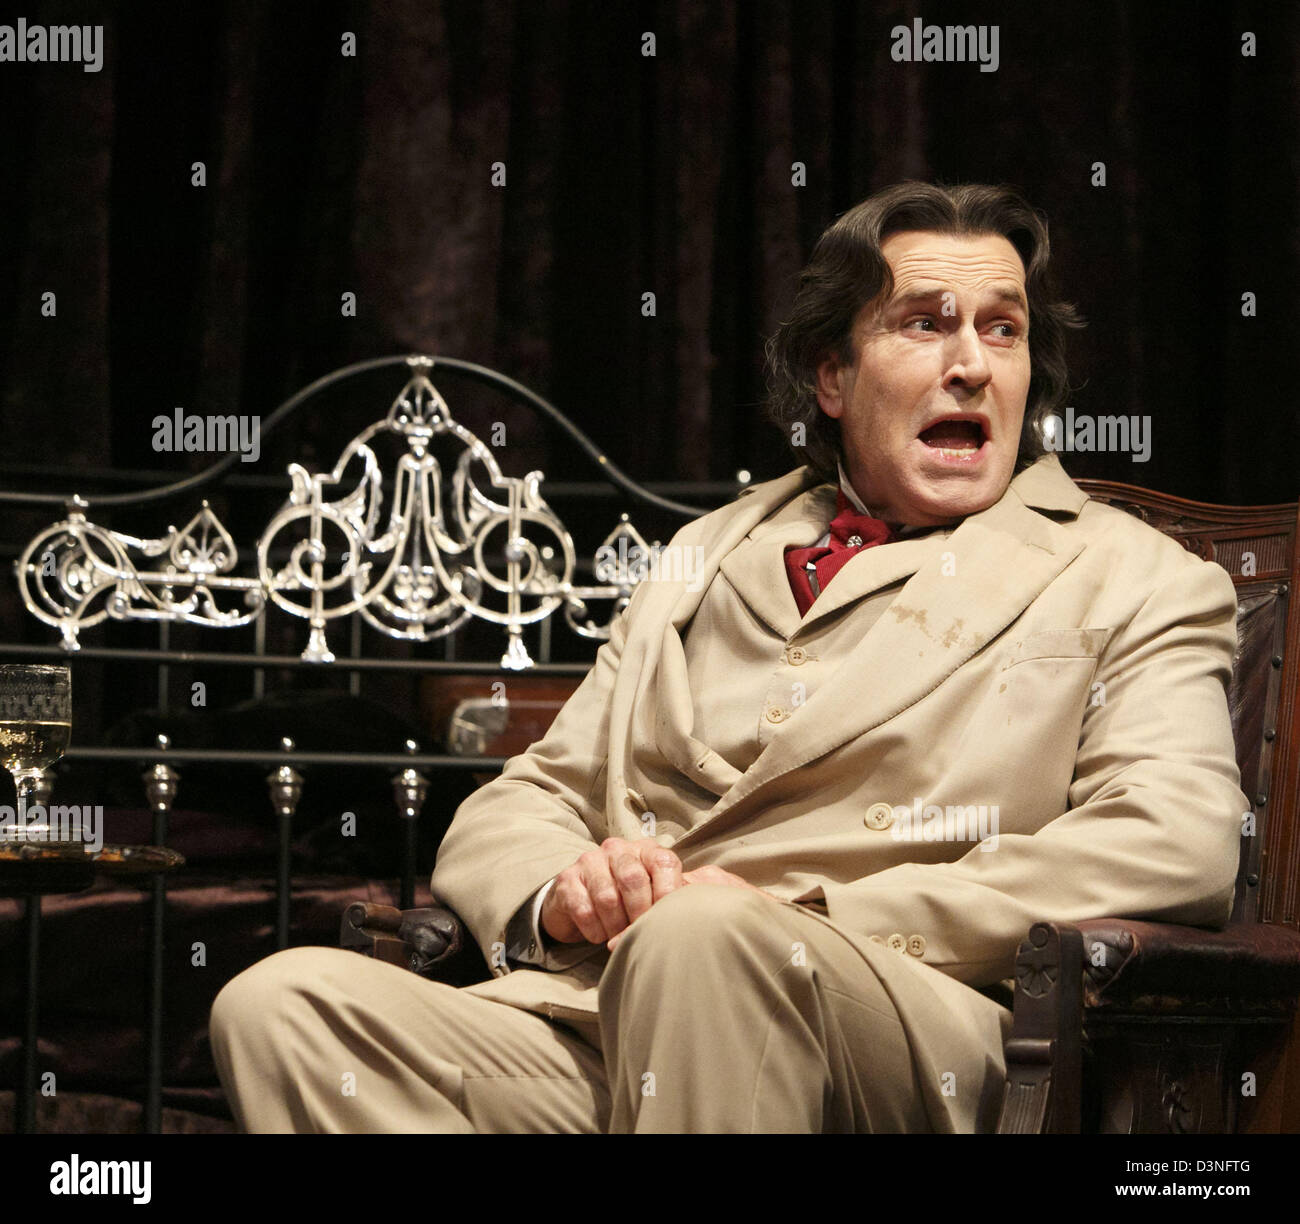 Rupert Everett as Oscar Wilde in THE JUDAS KISS by David Hare at the Duke of York's Theatre, London WC2 in 2013 design: Dale Ferguson costumes: Sue Blane lighting: Rick Fisher director: Neil Armfield Stock Photo